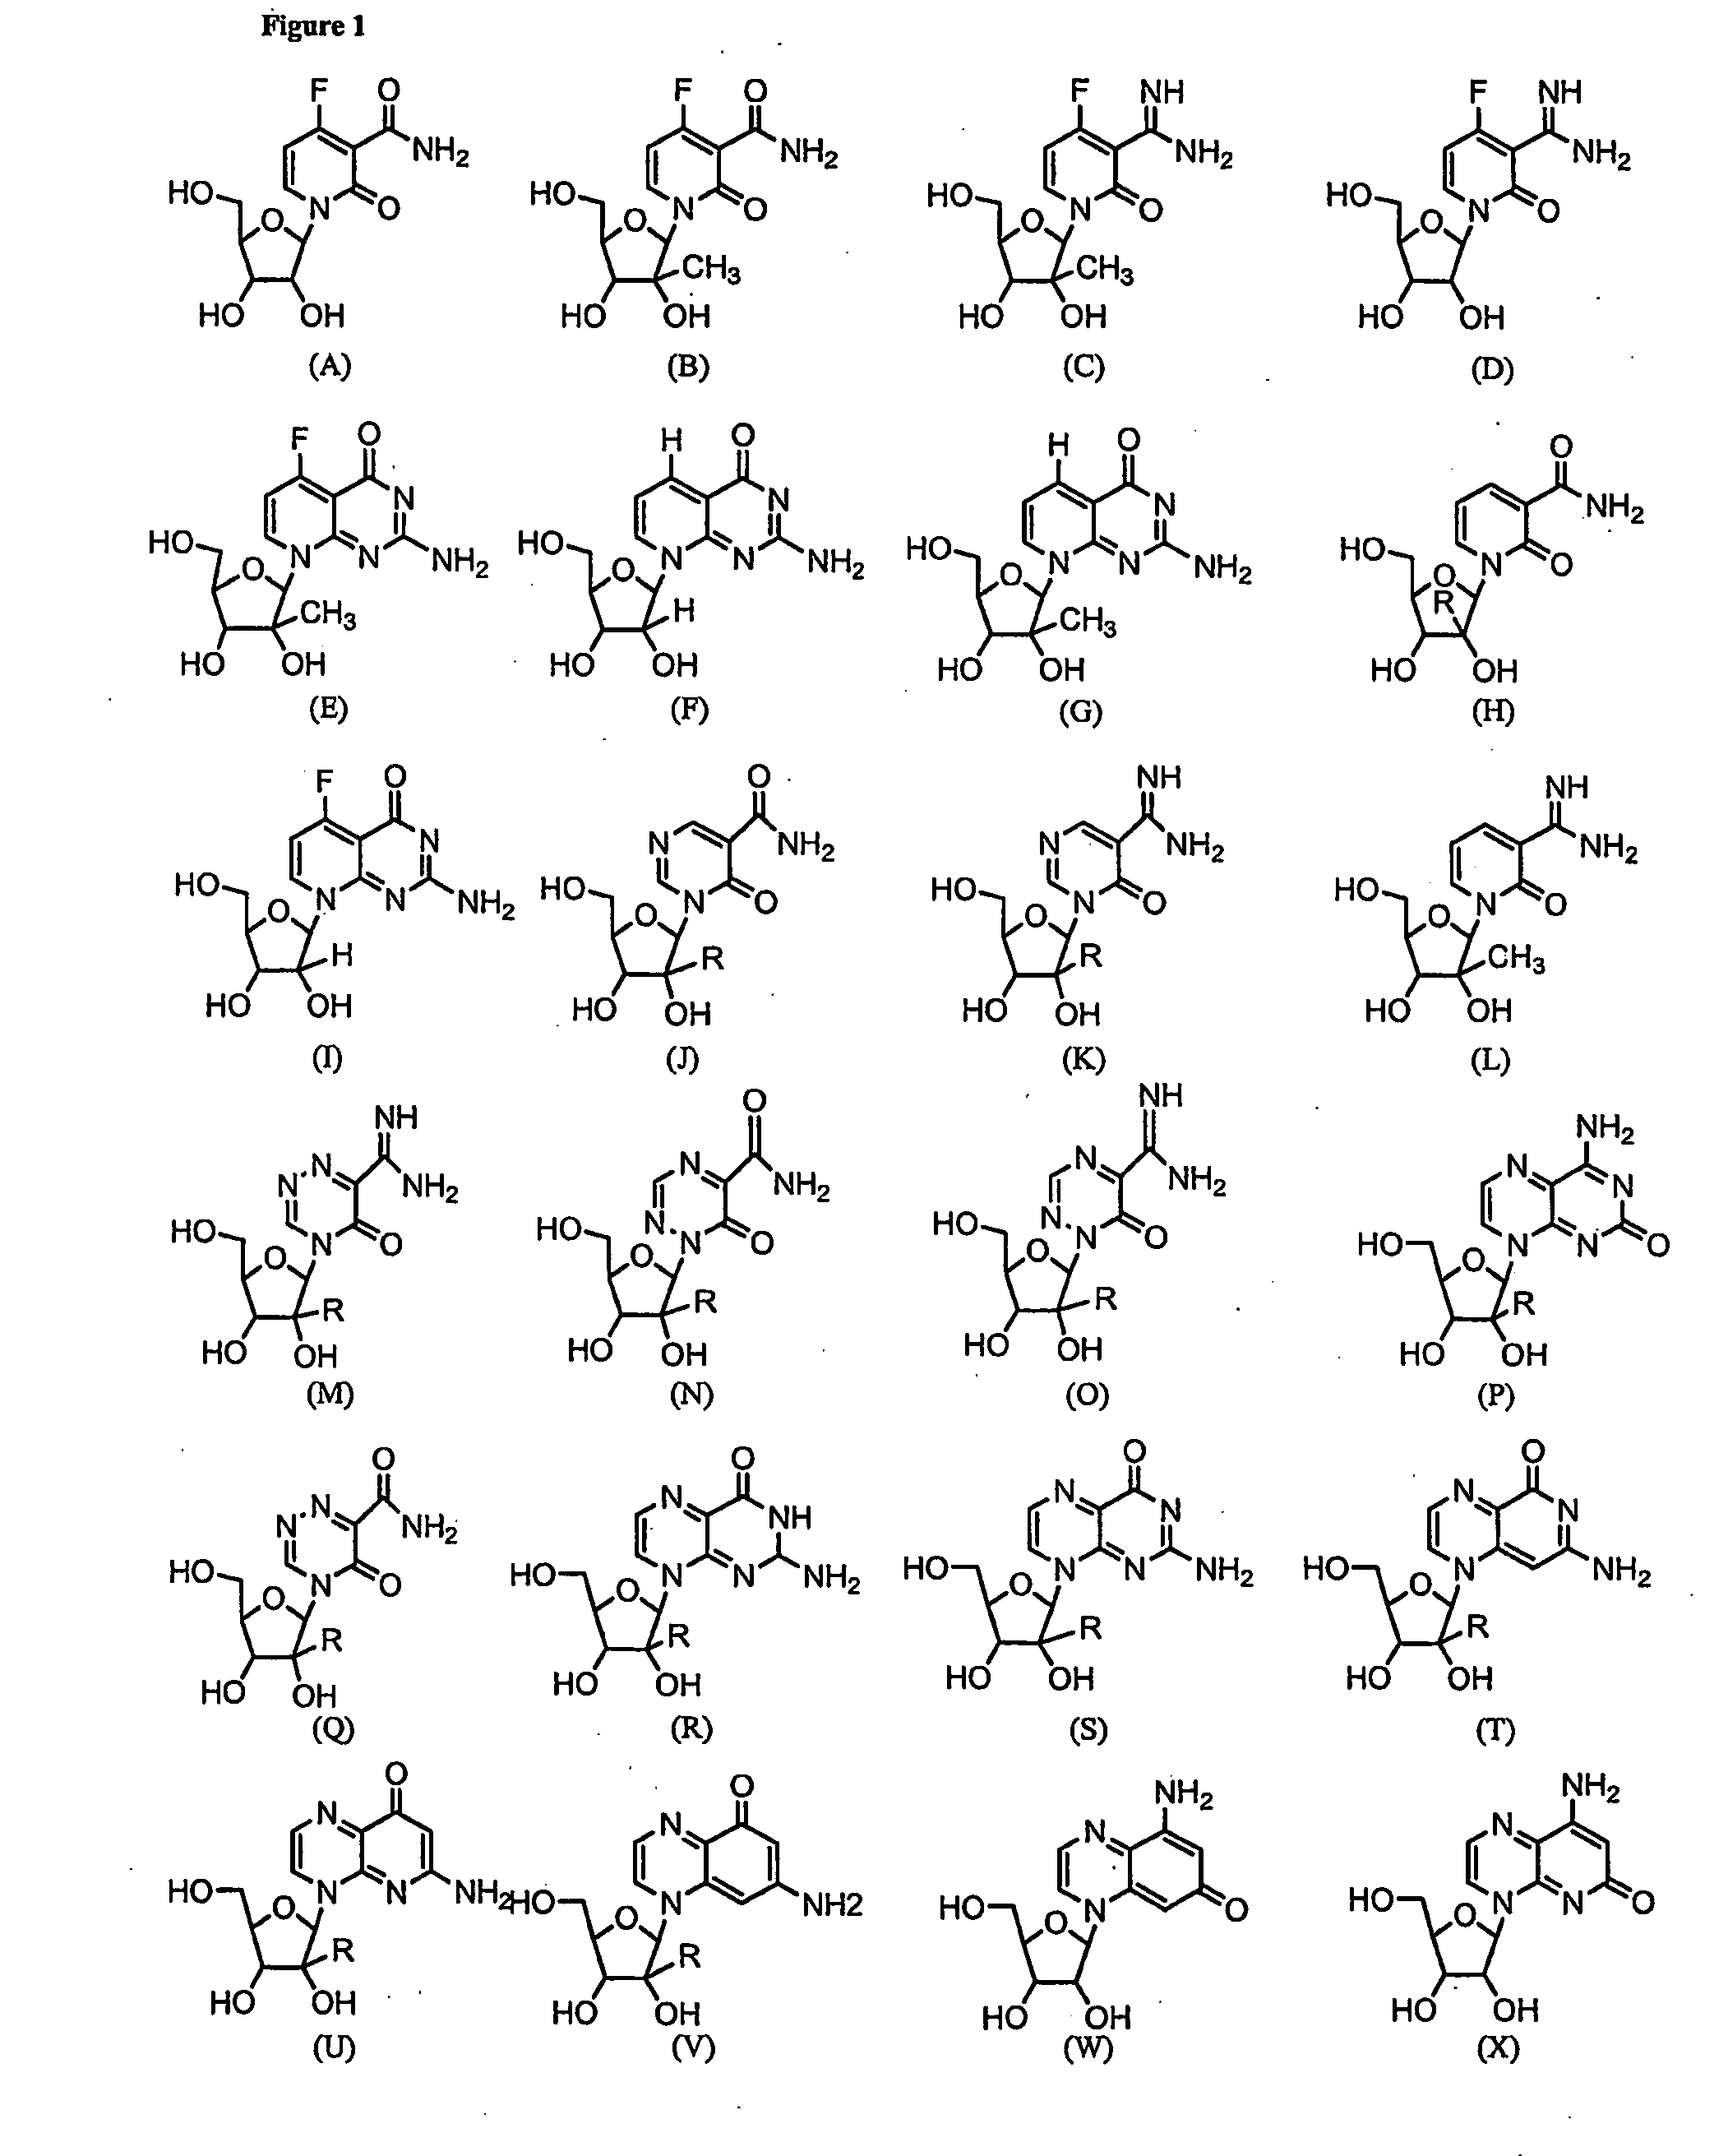 Nucleosides With Non-Natural Bases as Anti-Viral Agents